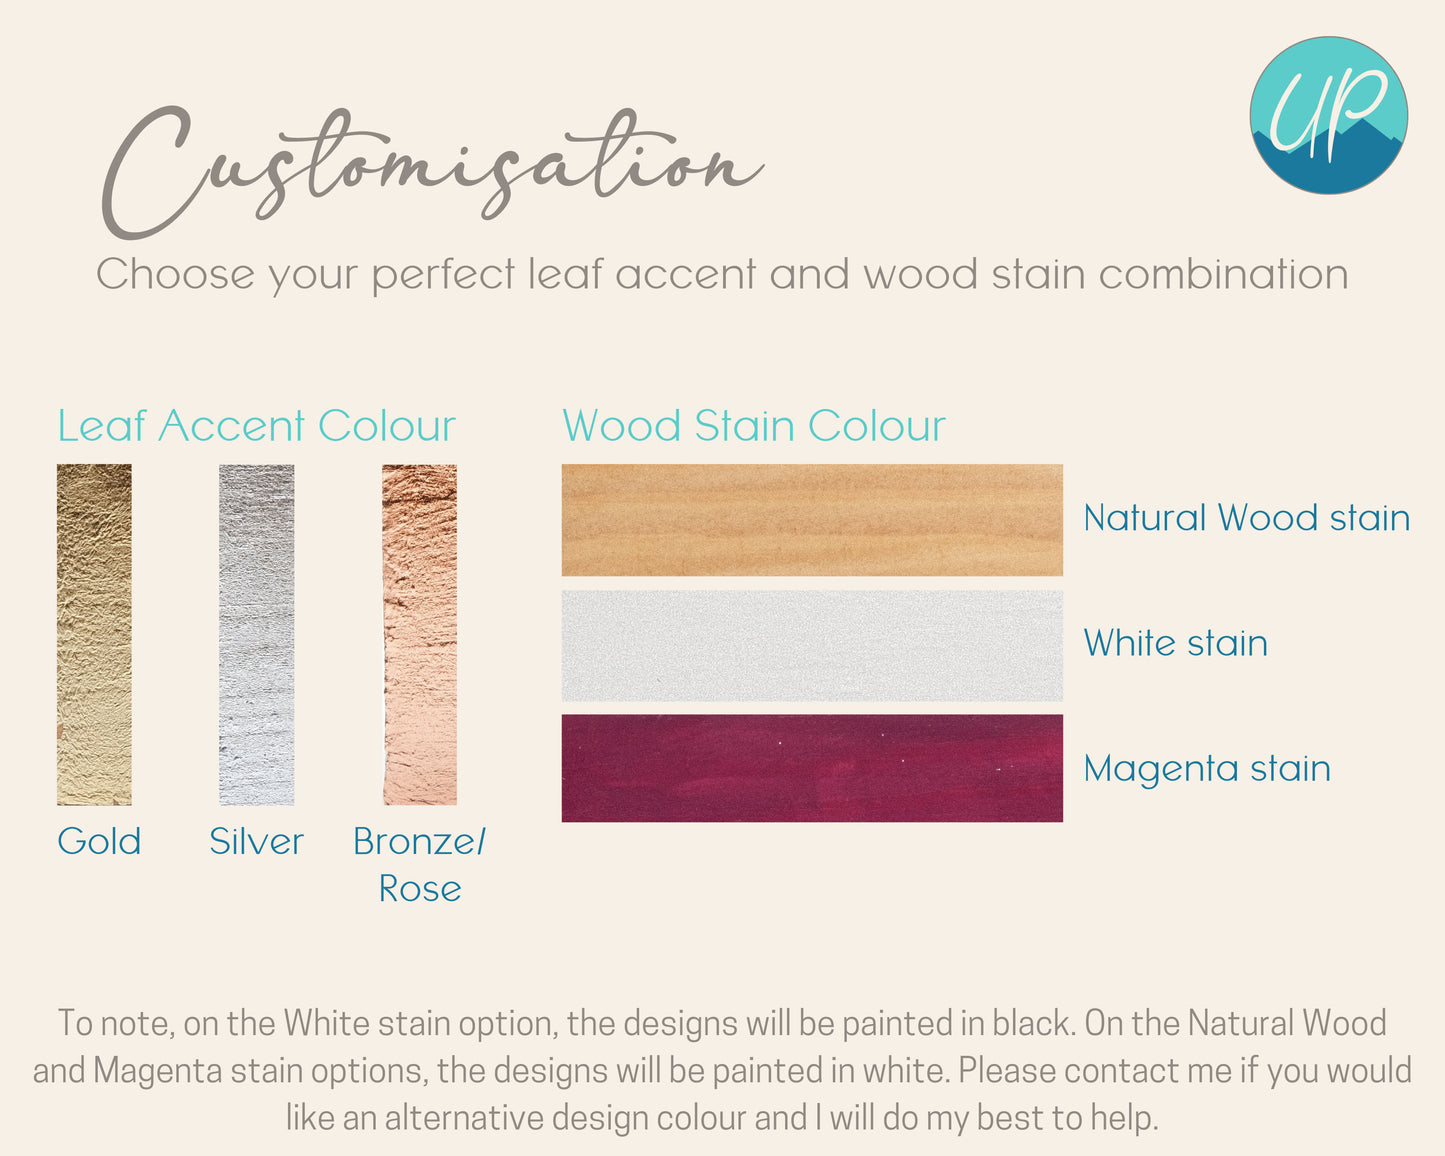 Light colored information page with brand logo showing customization options. Leaf accent available in gold, silver and bronze rose gold. Wood stain available in natural wood, white and magenta.